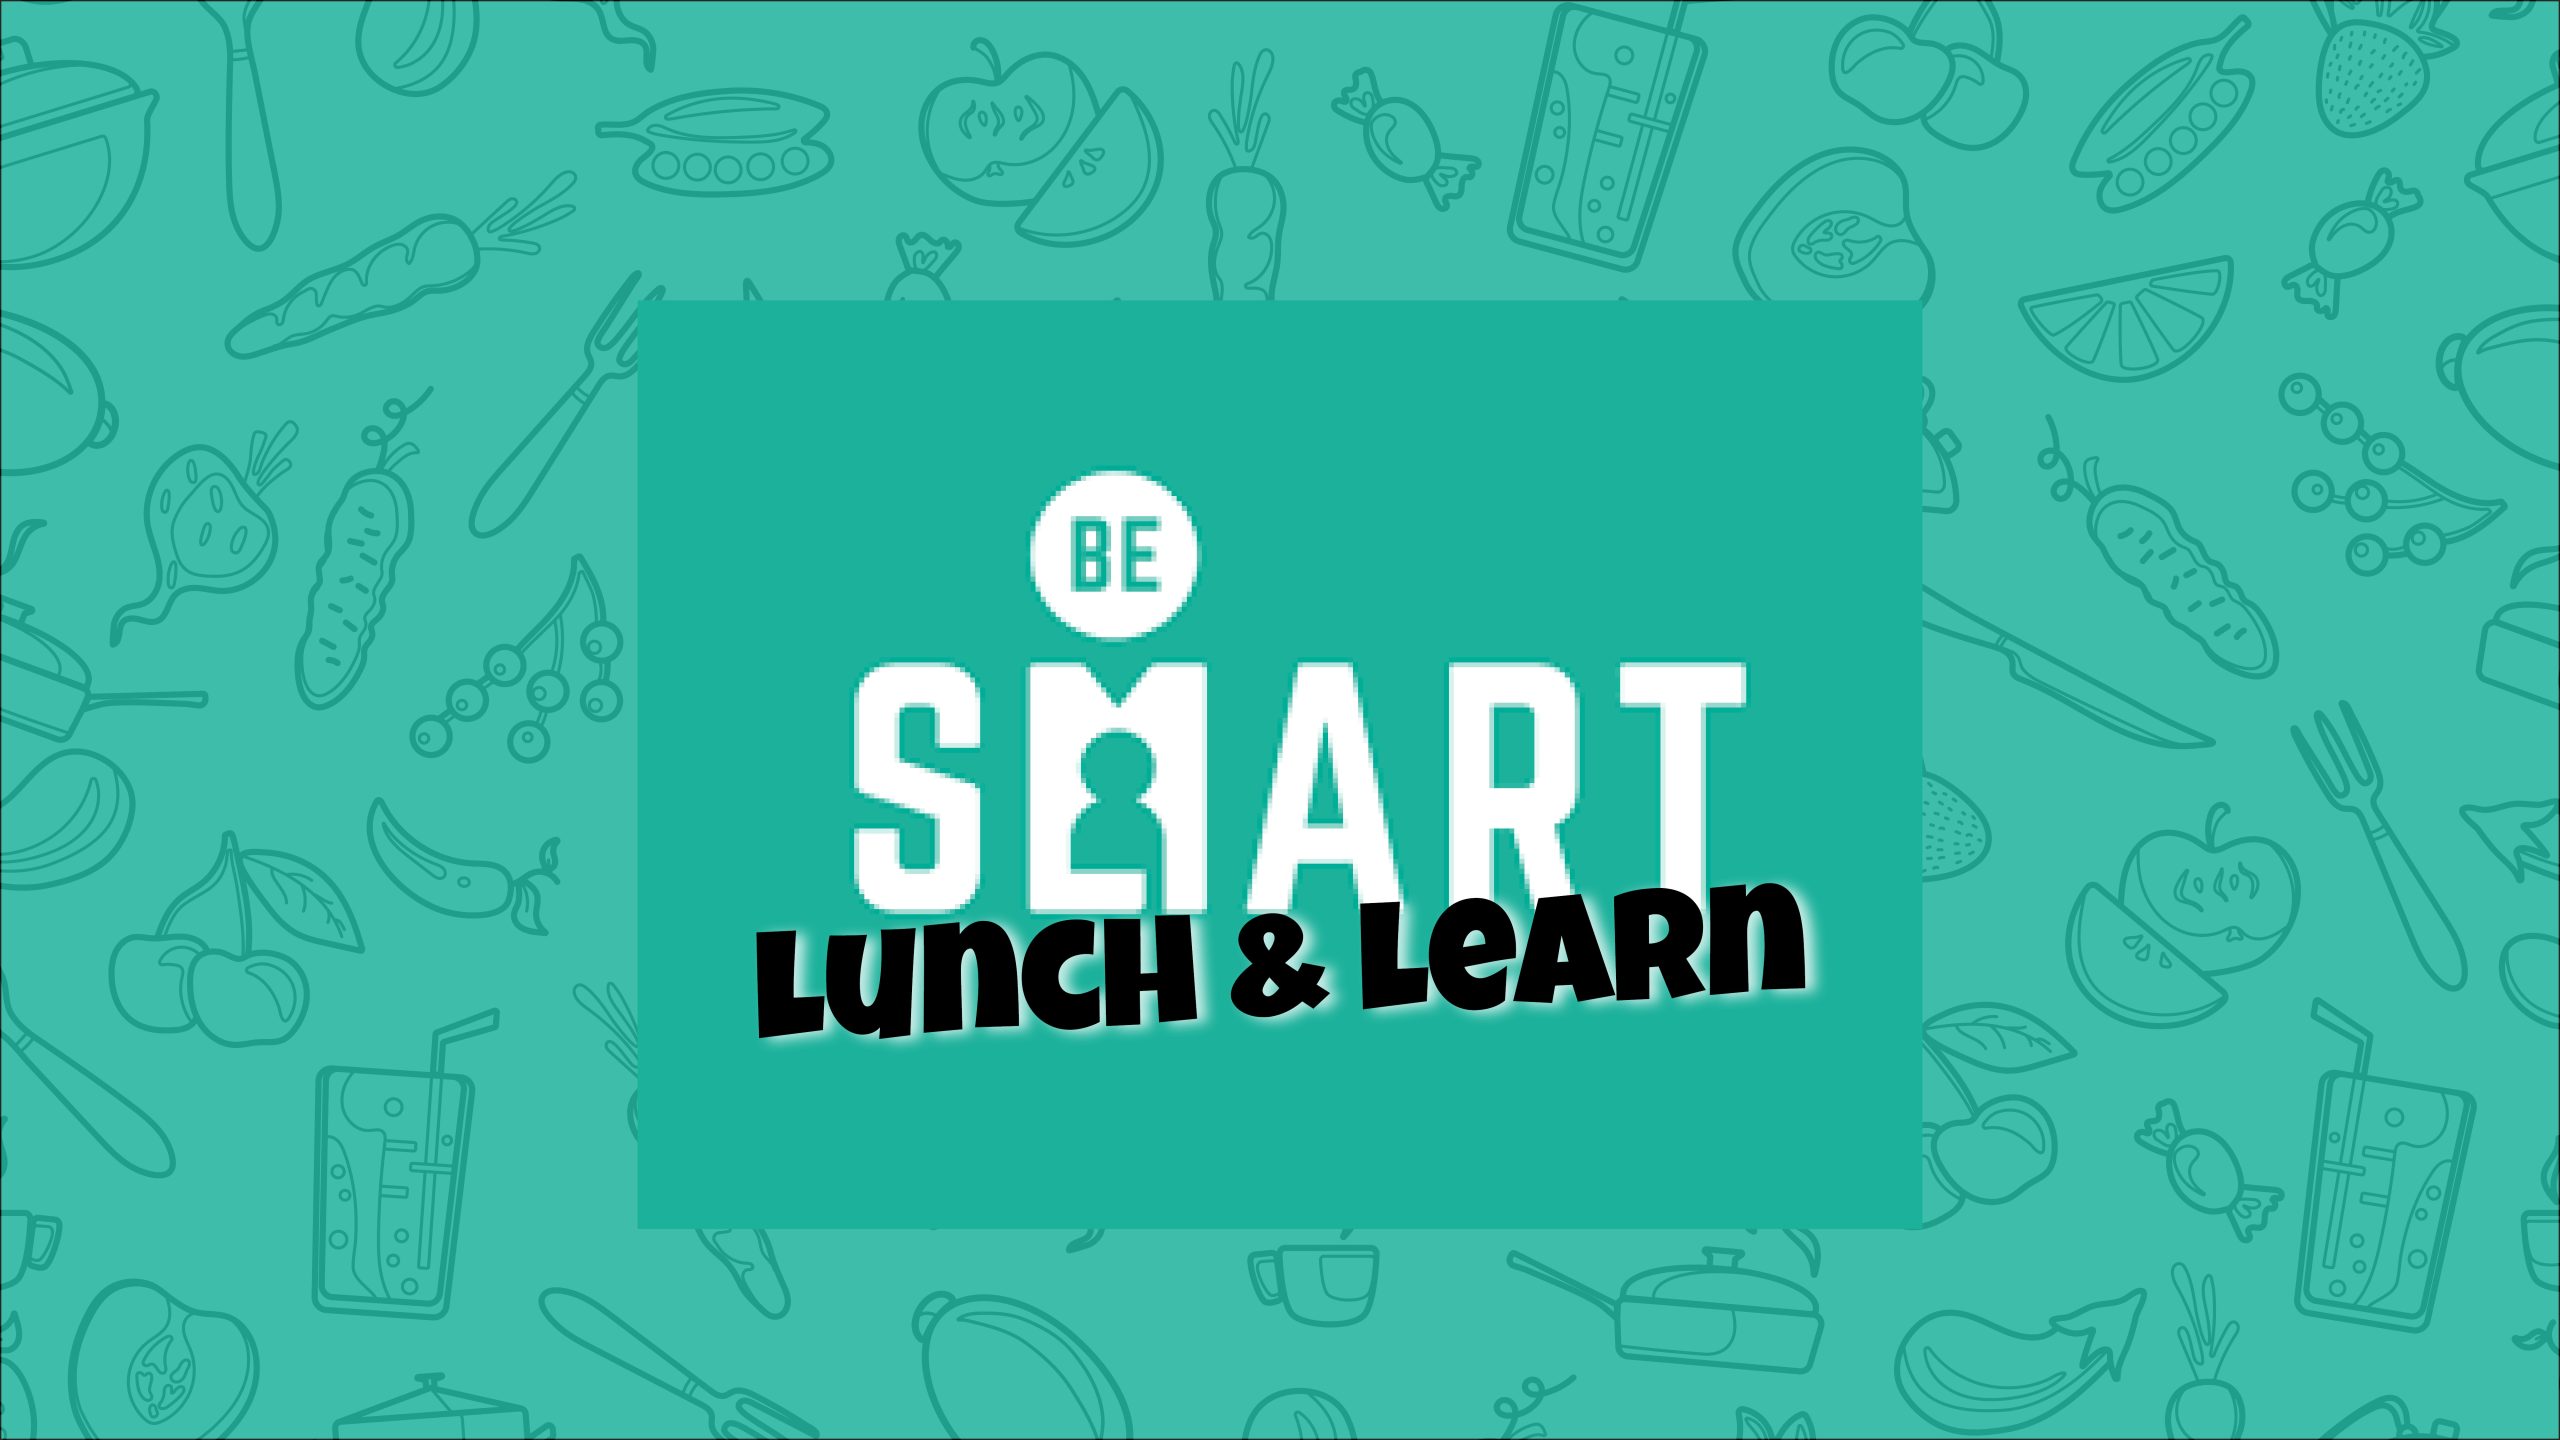 Be SMART: Lunch and Learn